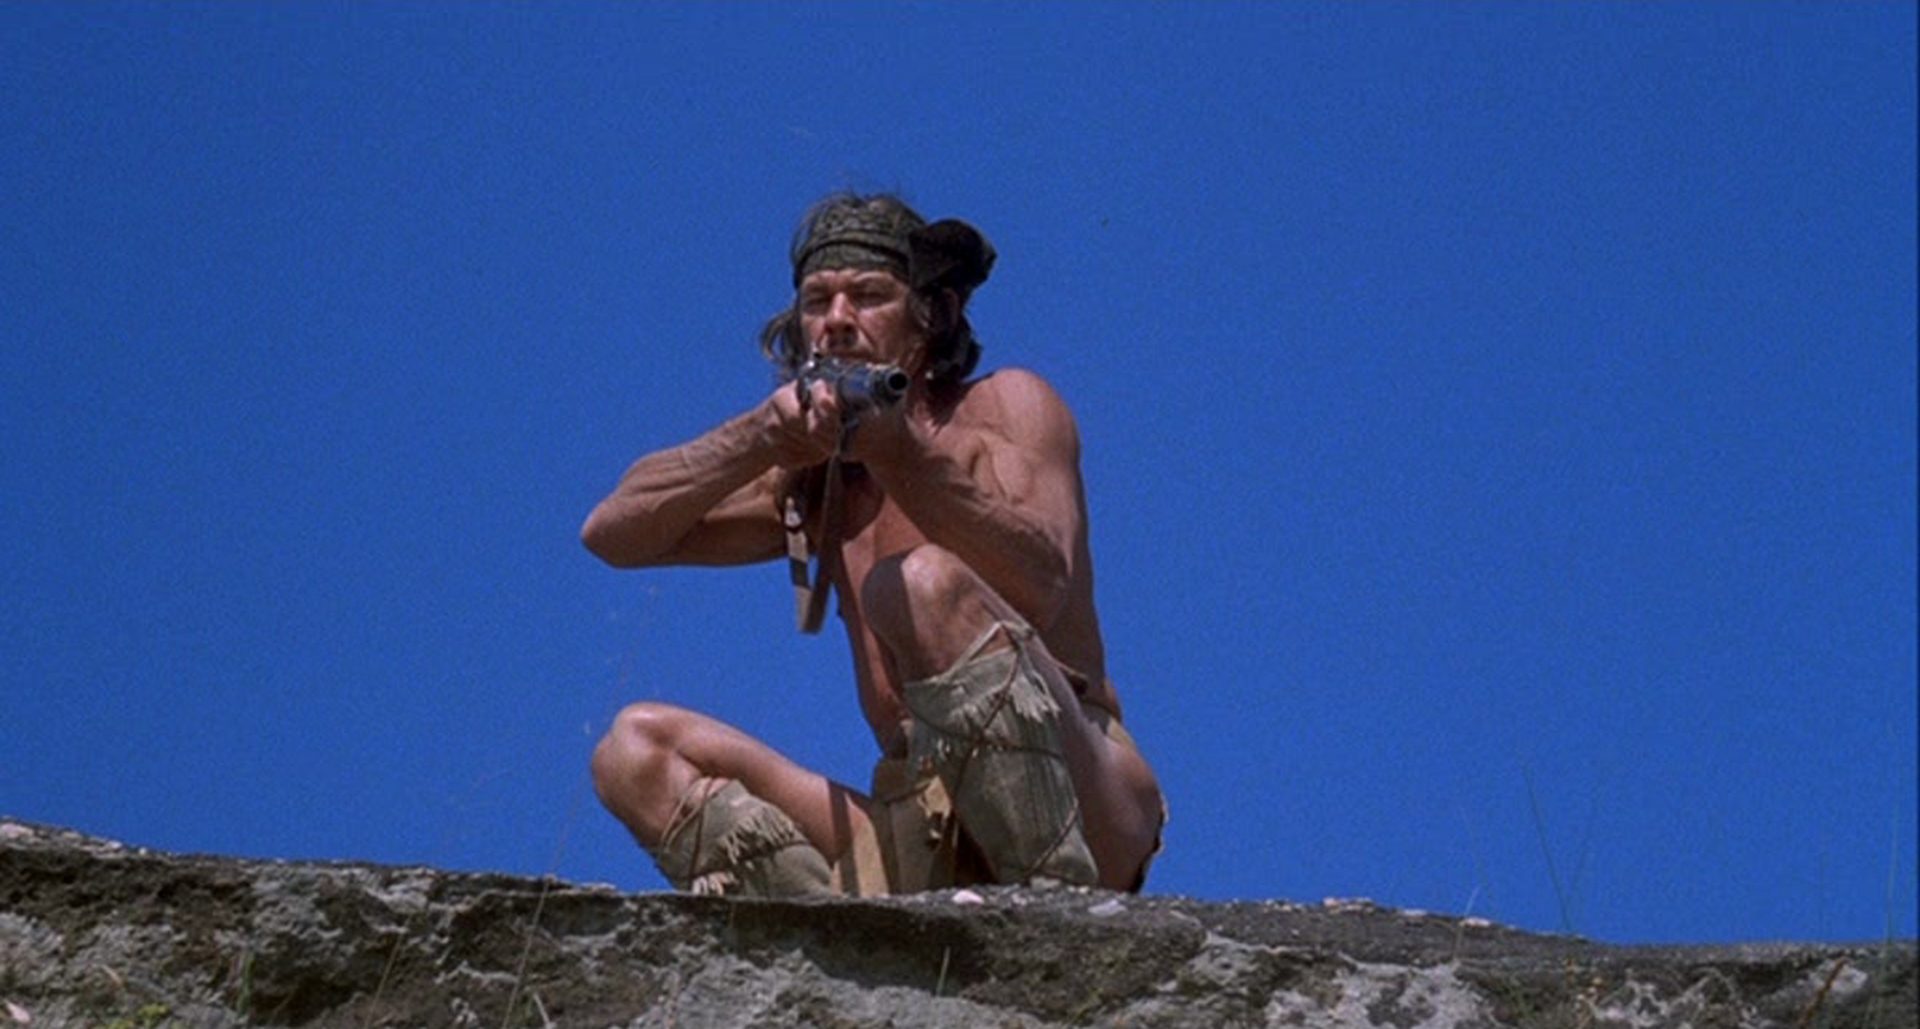 Charles Bronson as Chato against a blue sky in an alert fighting pose and with rifle at the ready.